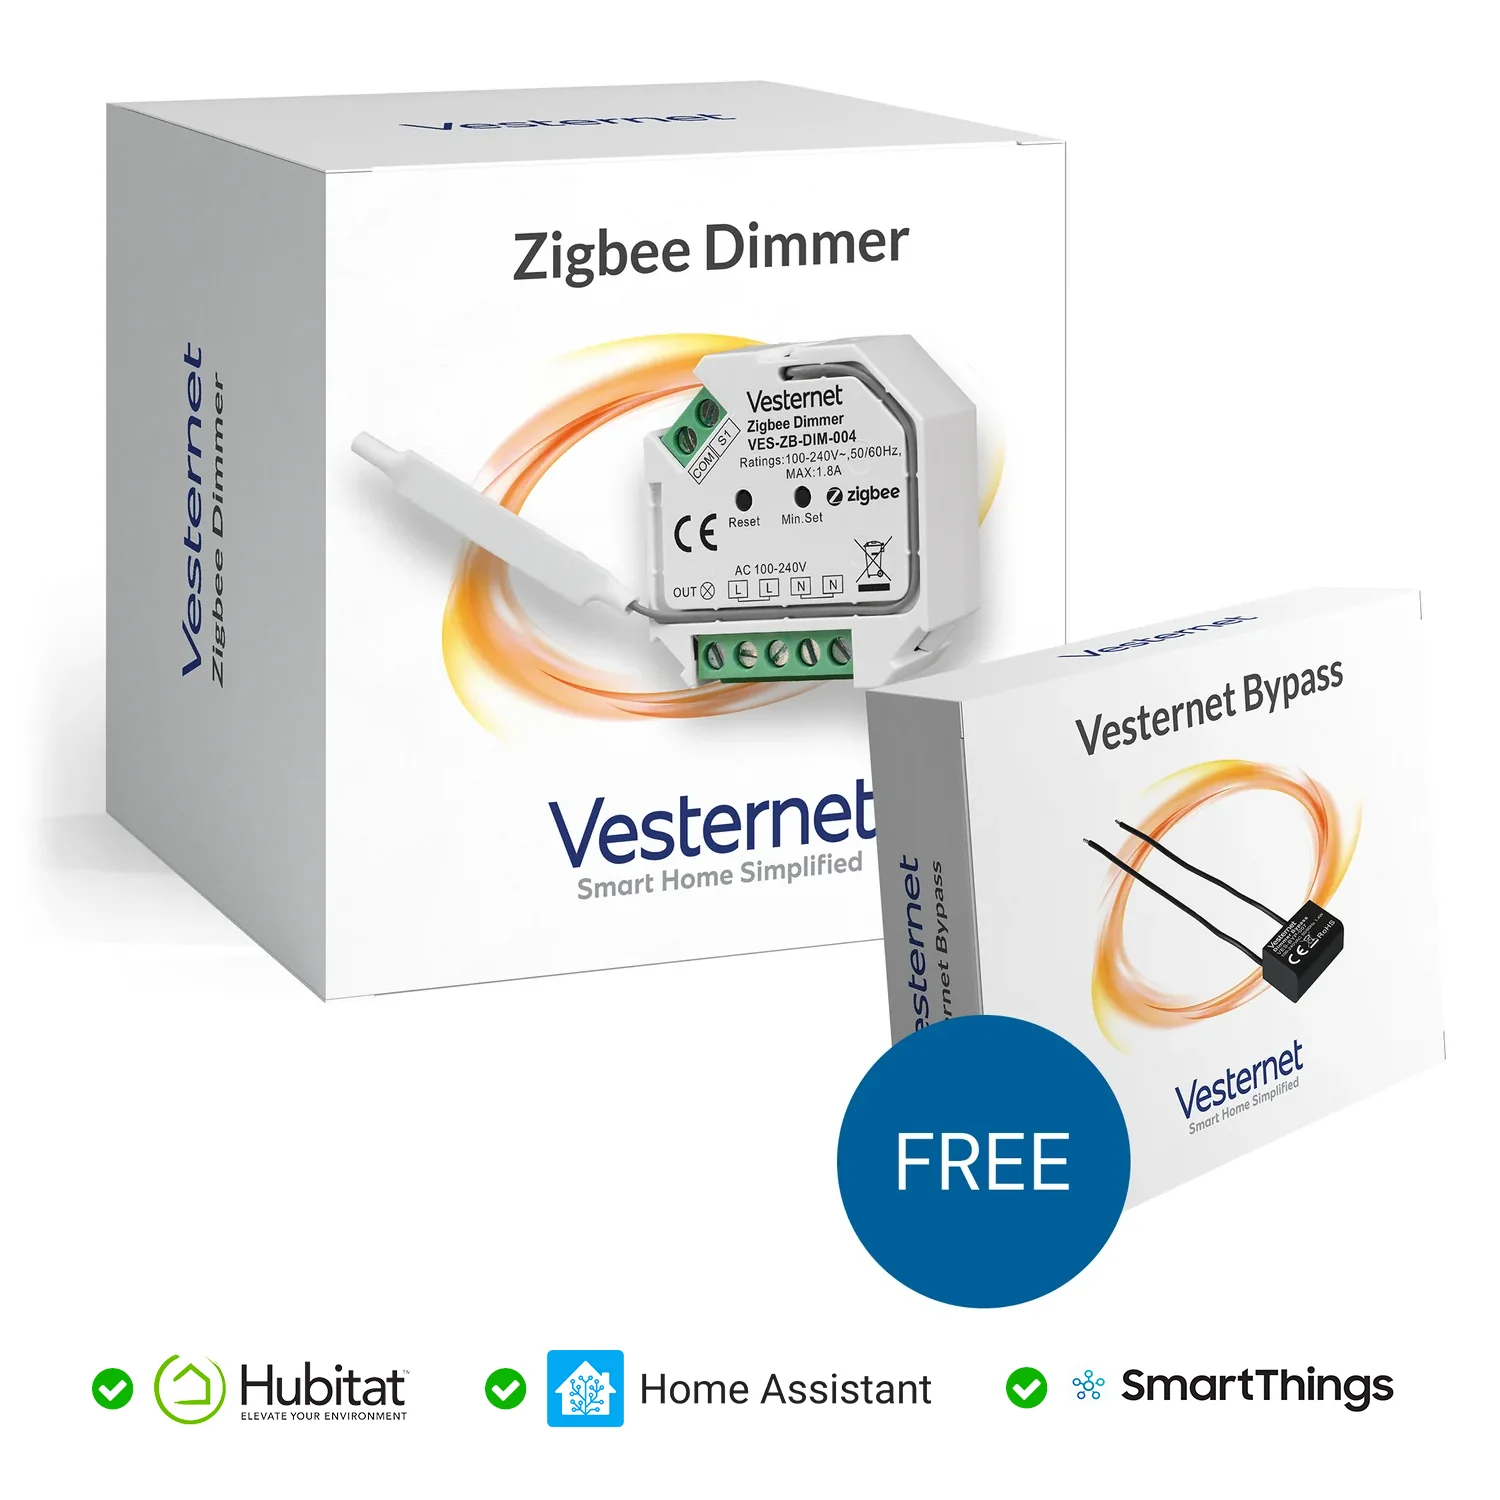 Vesternet Zigbee Dimmer Questions & Answers